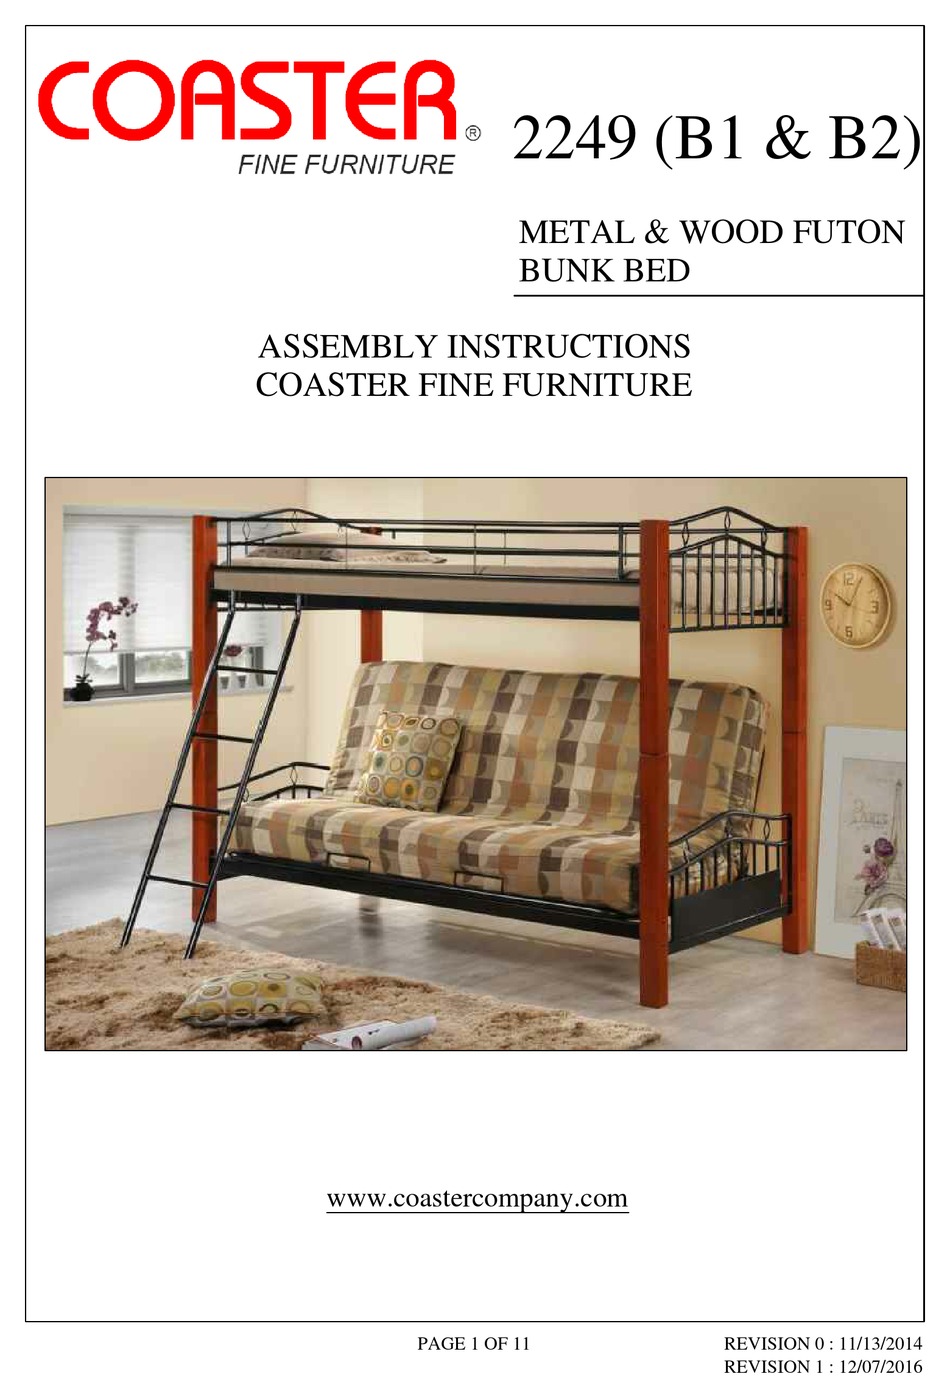 Coaster 2249 Assembly Instructions, How To Assemble A Futon Bunk Bed